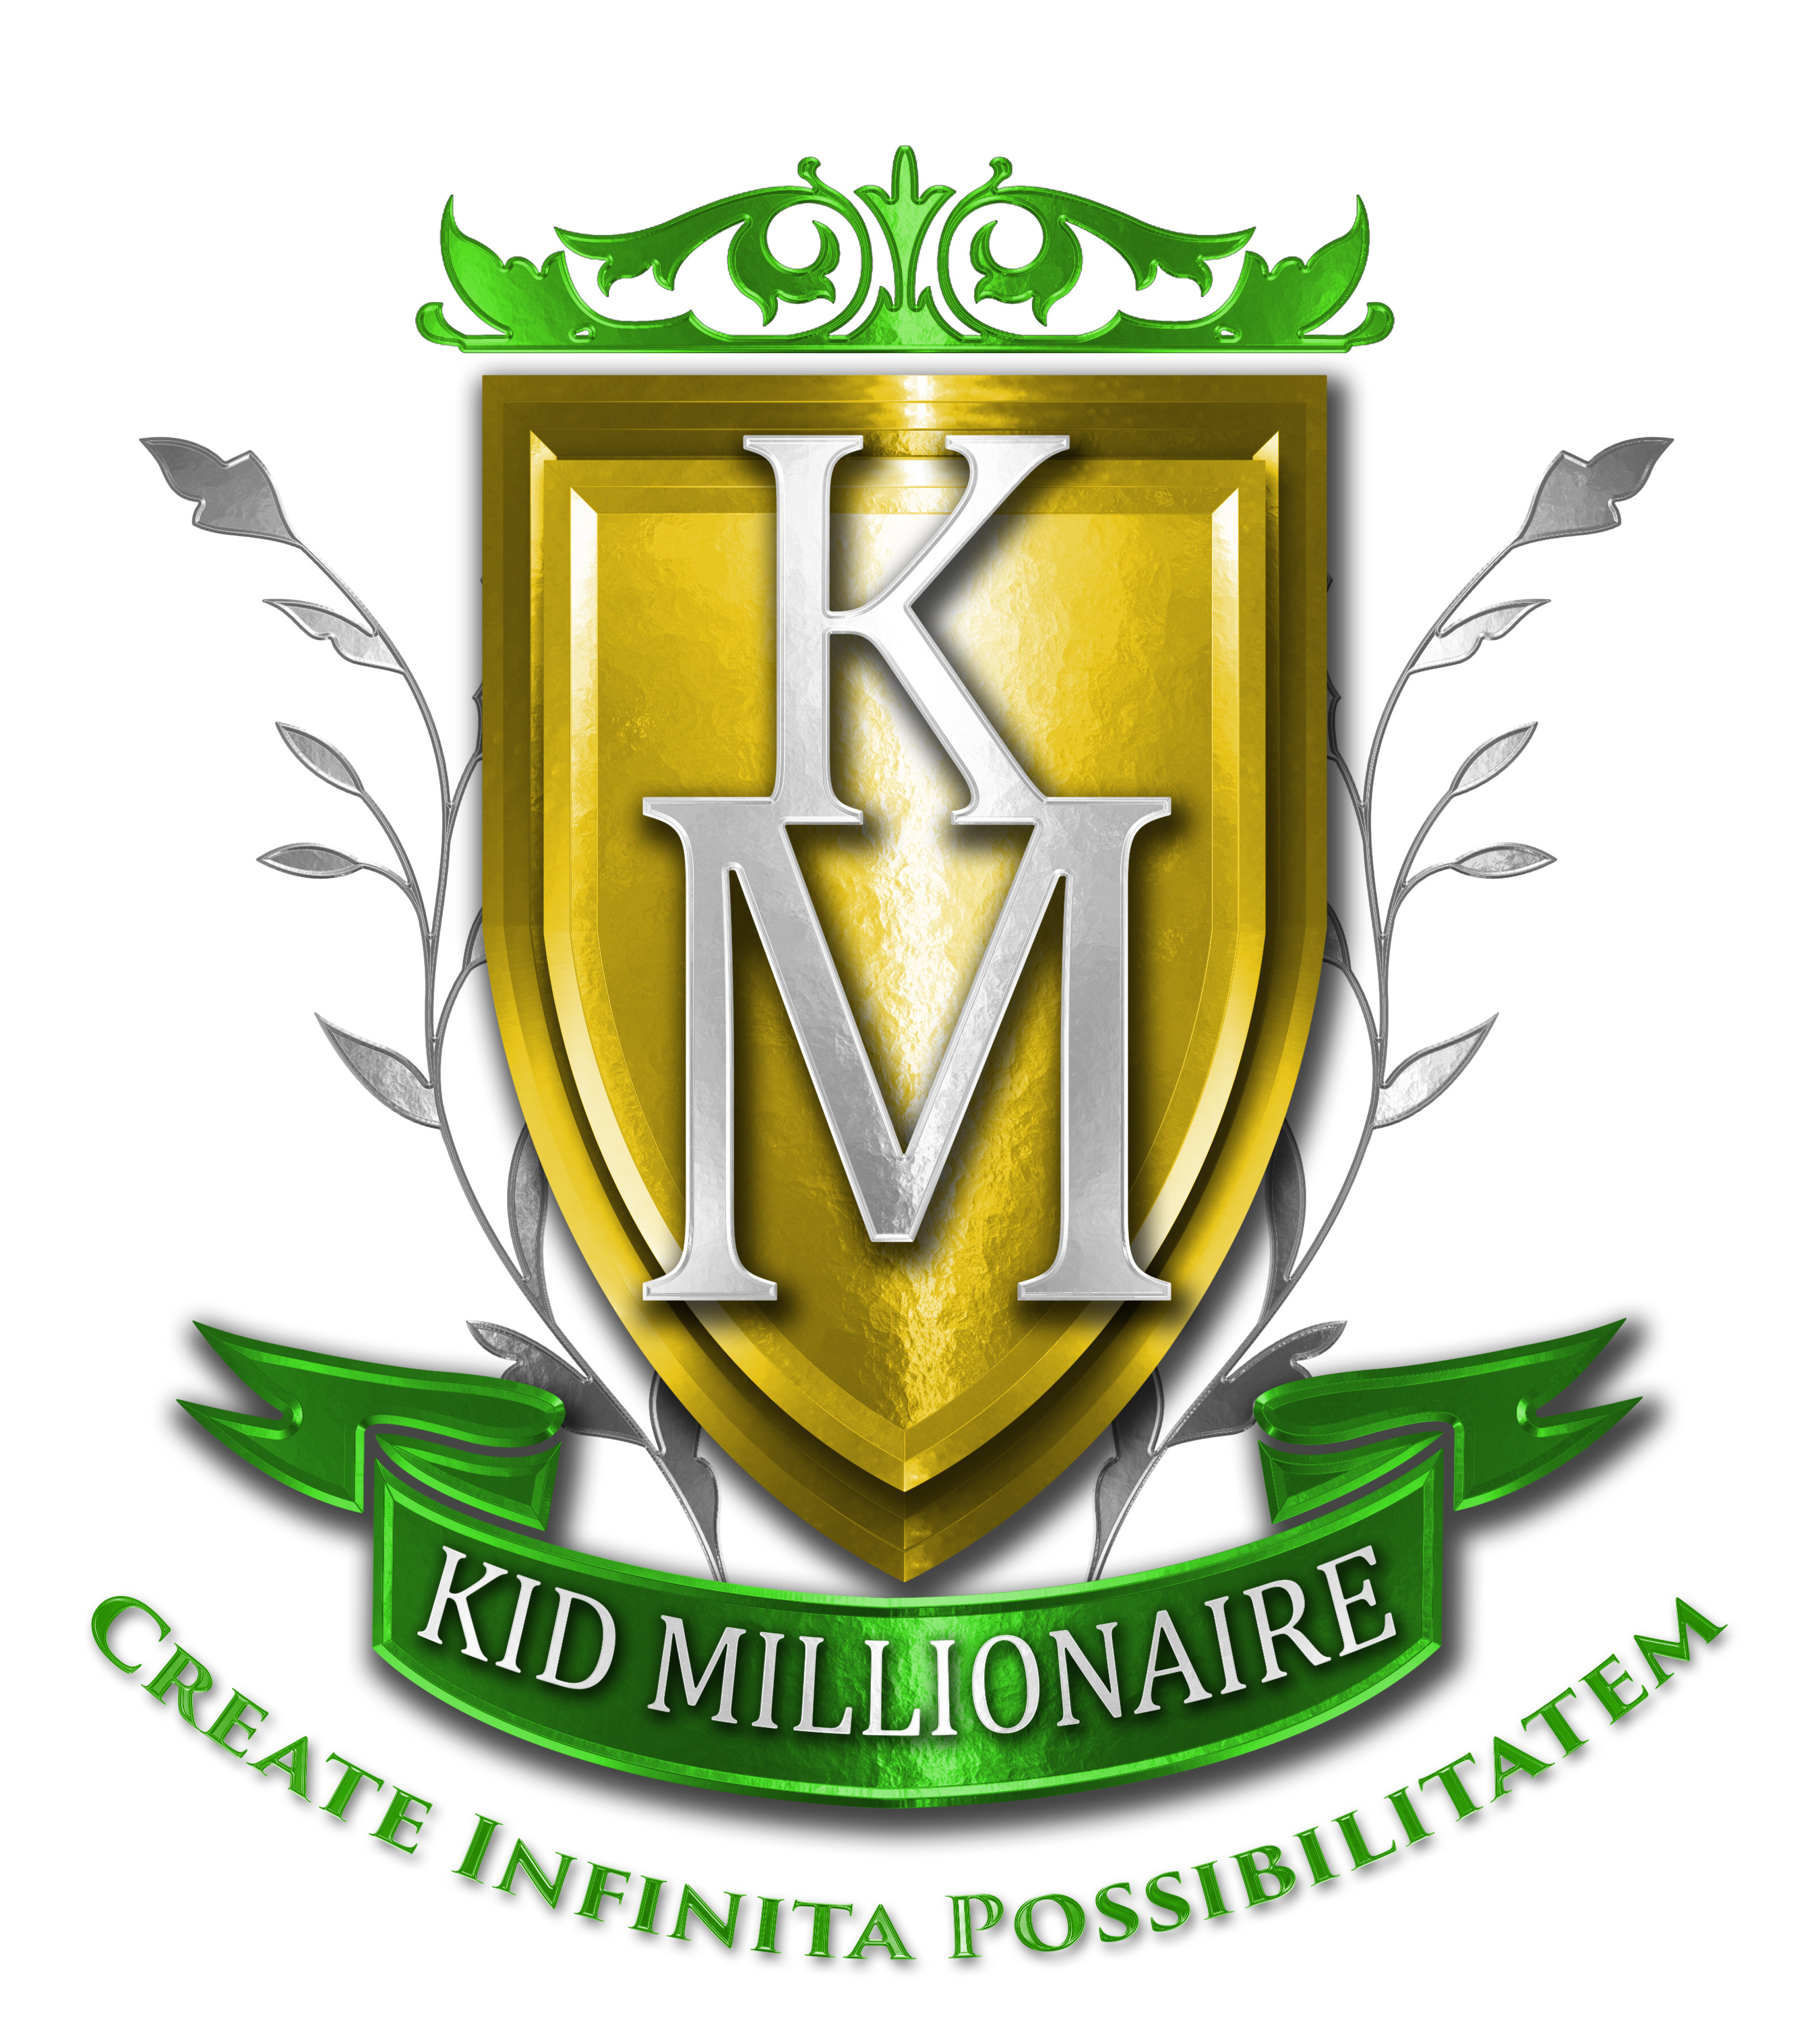 X’ernona Woods’ Kid Millionaire Initiative and Programs are Supporting Young People Find the Path to Financial Freedom